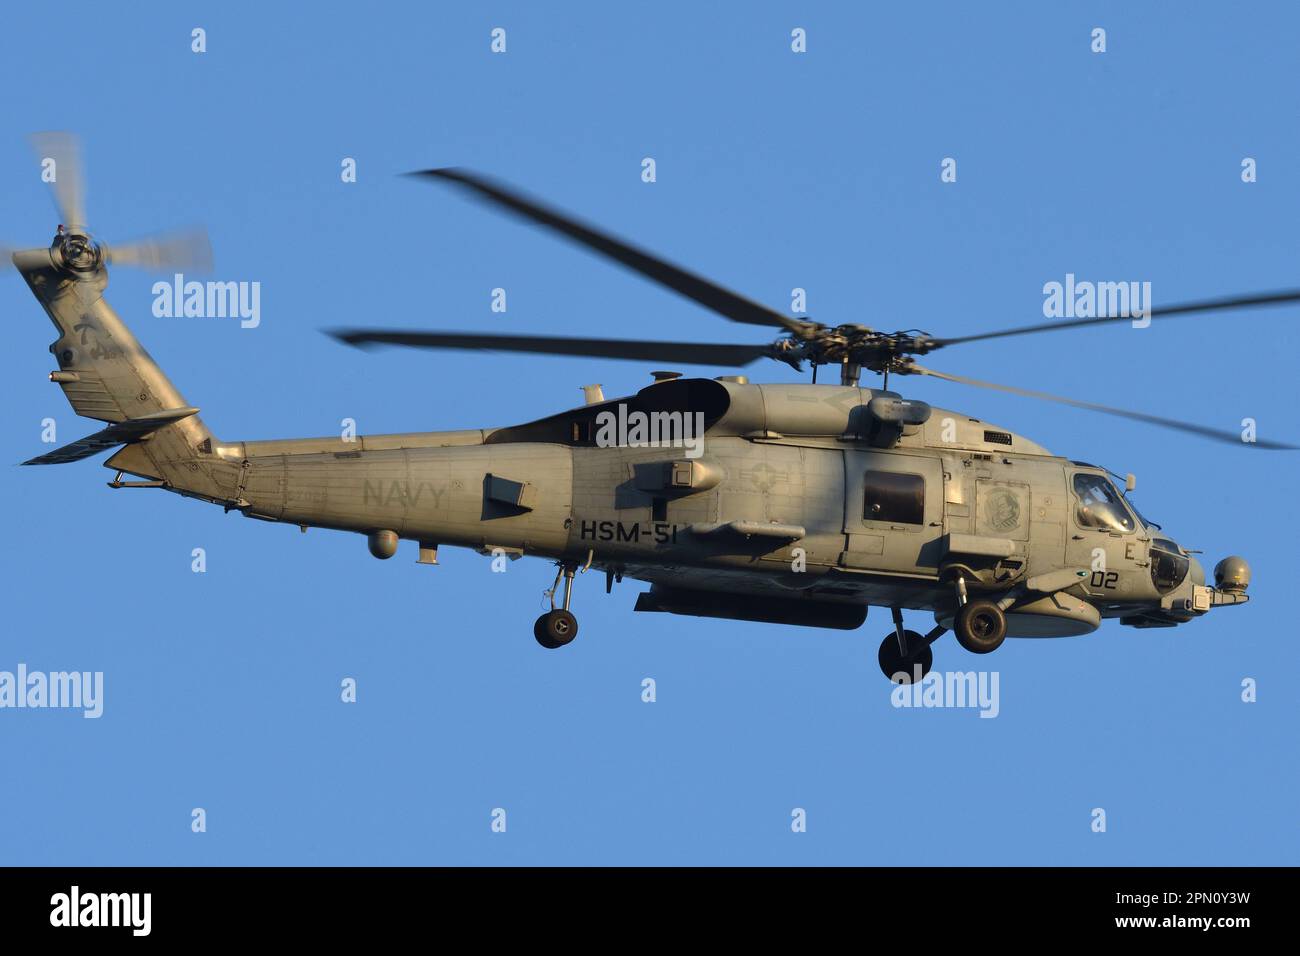 Kanagawa Prefecture, Japan - May 04, 2017: United States Navy Sikorsky MH-60R Seahawk utility maritime helicopter from HSM-51 Warlords. Stock Photo